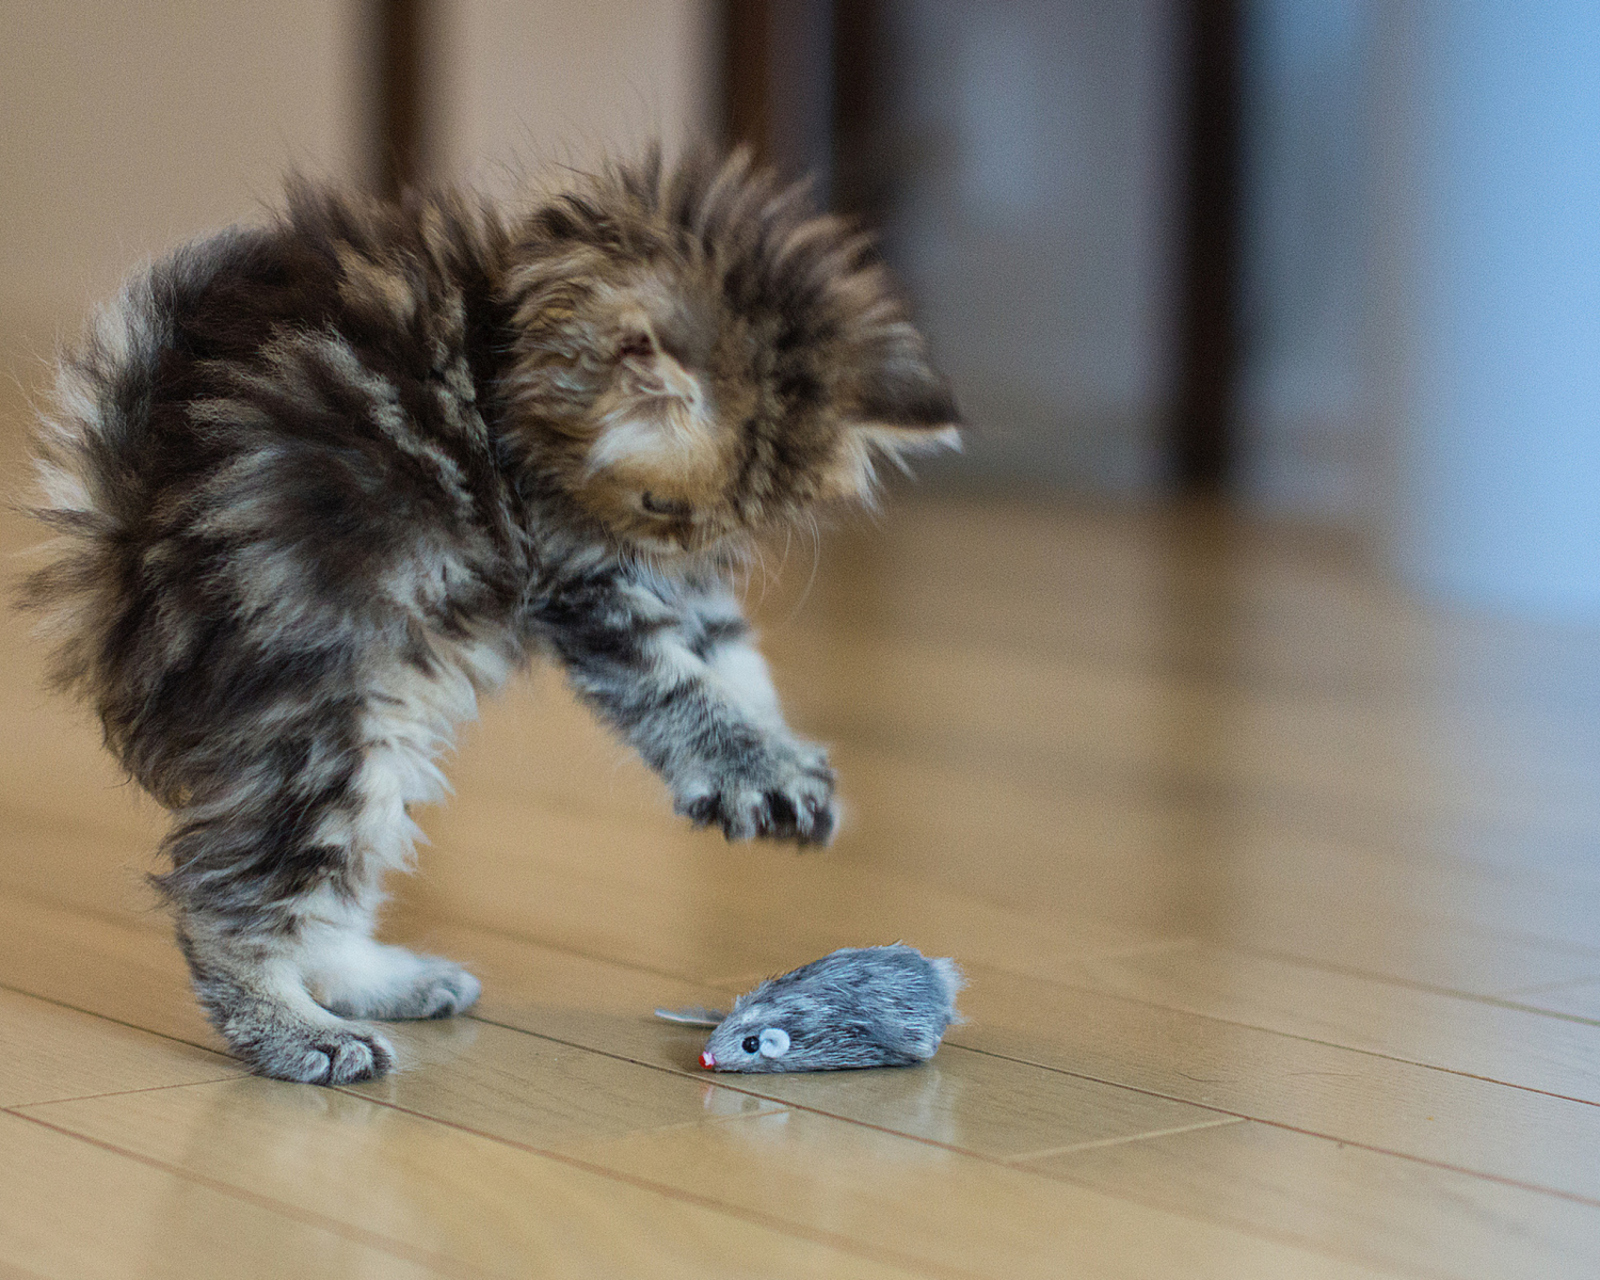 Funny Kitten Playing With Toy Mouse screenshot #1 1600x1280